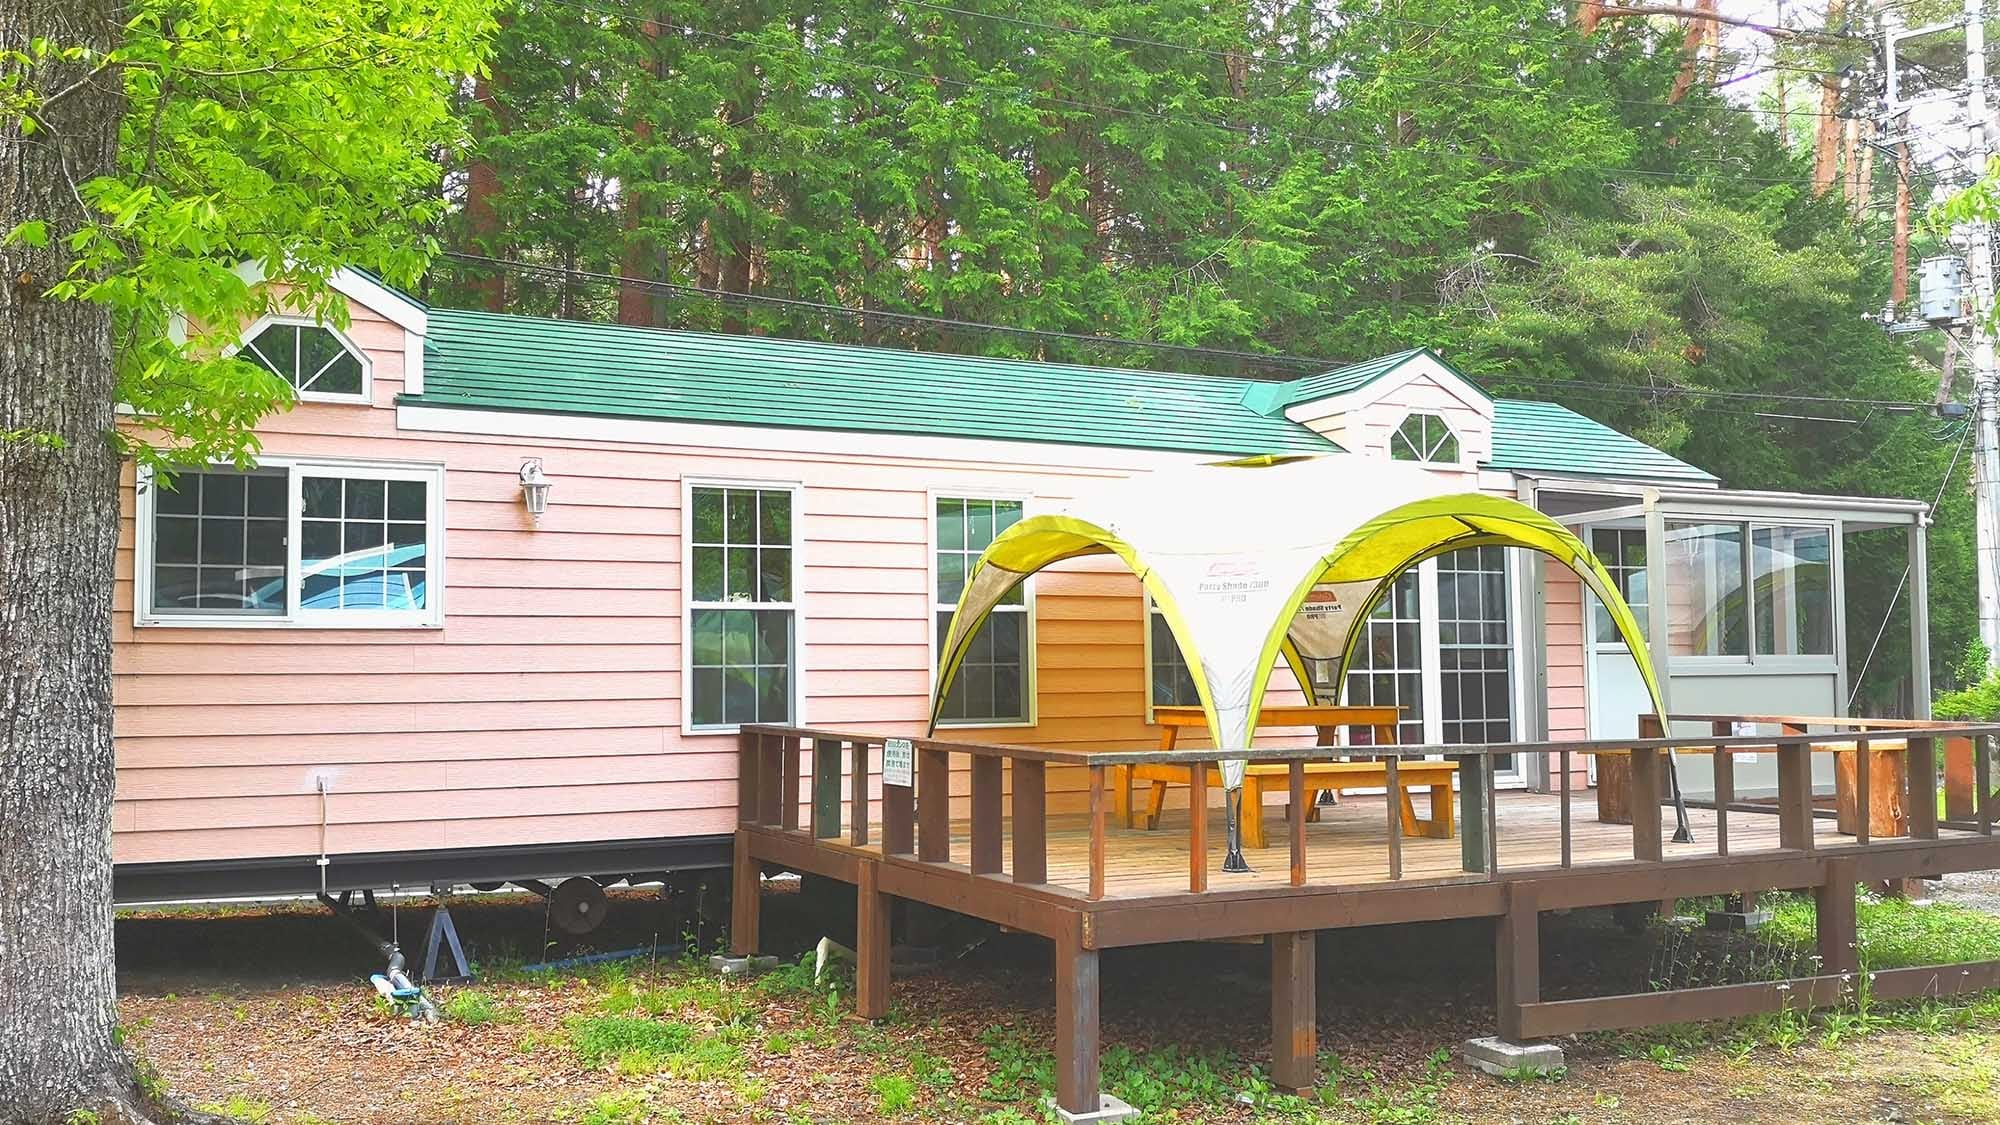 ・ The trailer house "Elite" is fully equipped and you can enjoy camping empty-handed.